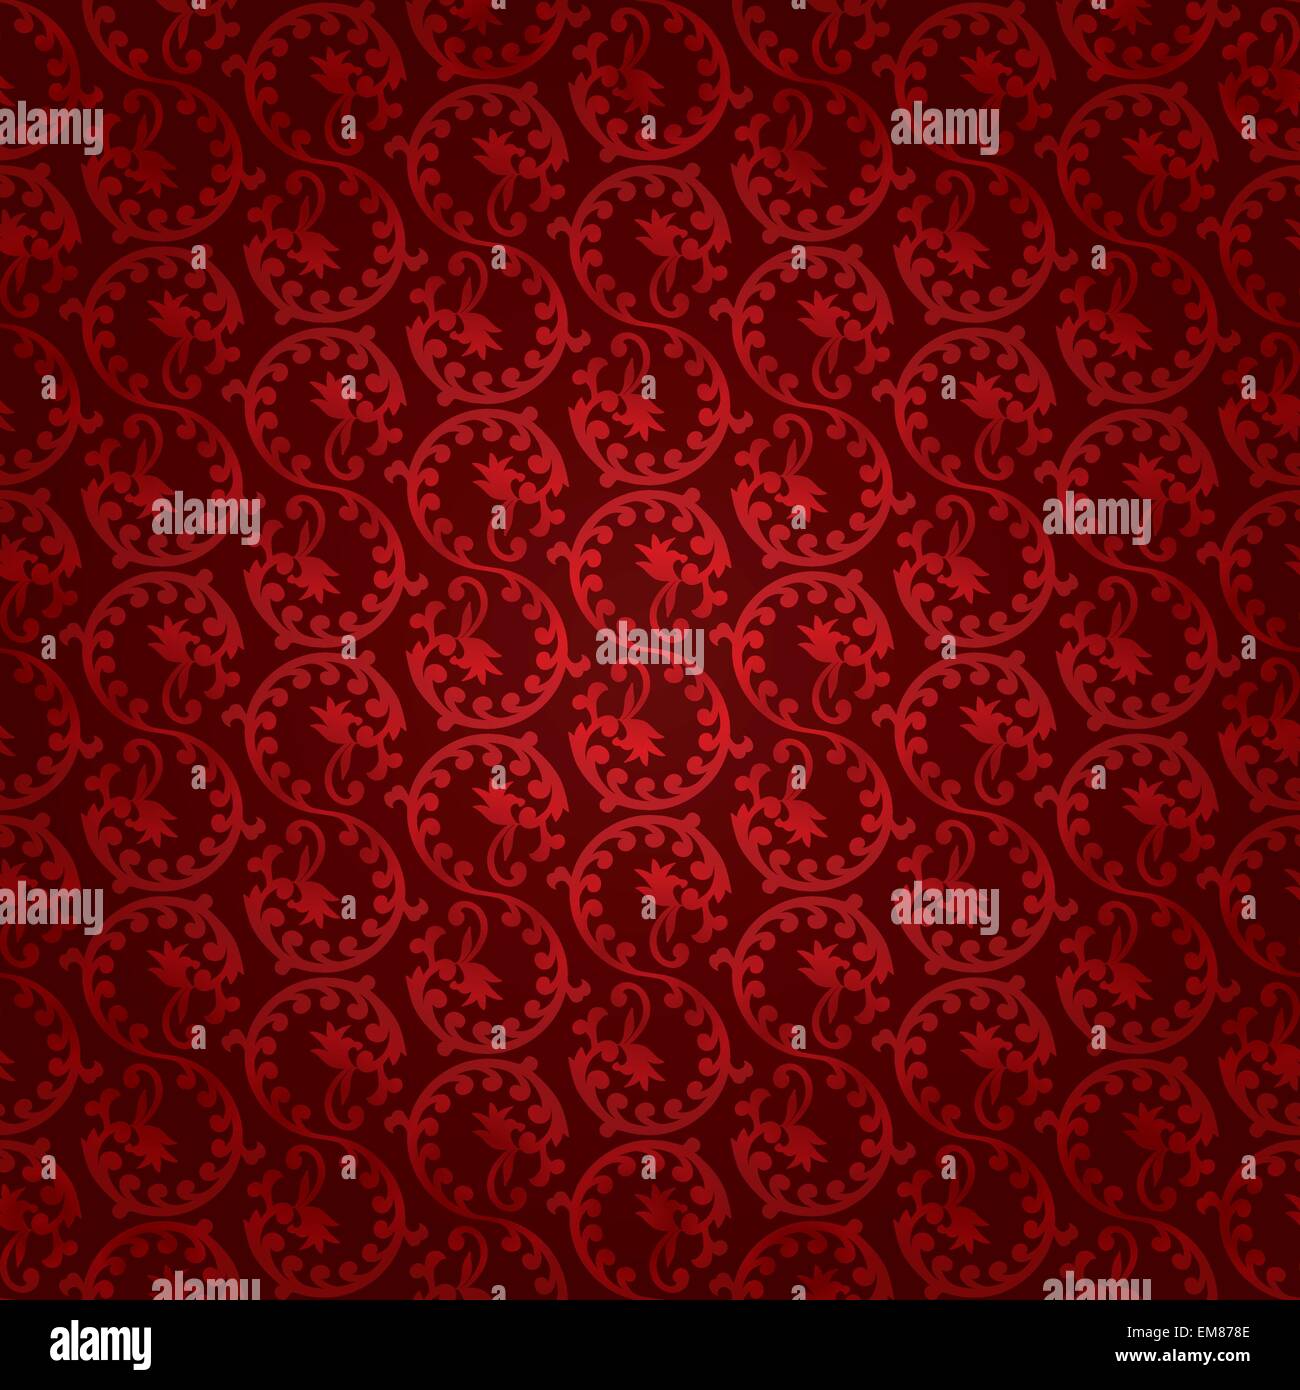 Red vintage floral seamless pattern Stock Vector